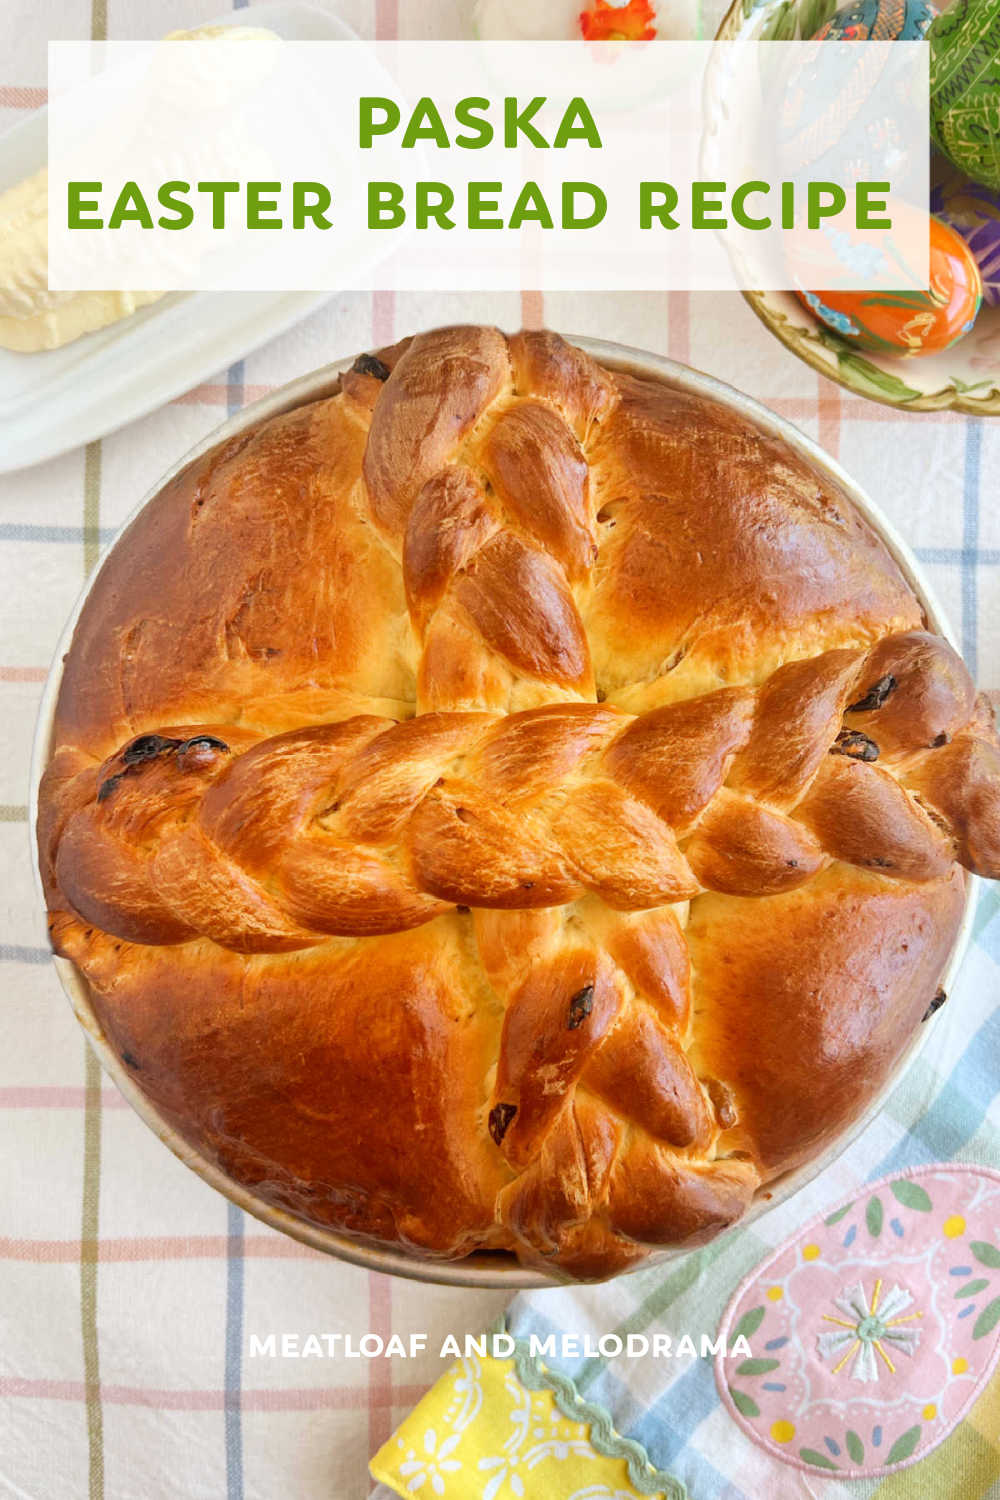 Paska Bread is a Ukrainian and Slovak Easter bread recipe that is traditionally served on Easter morning with other Eastern European Food. Similar to Polish Babka, this eggy, slightly sweet bread with golden raisins is a delicious family tradition. via @meamel